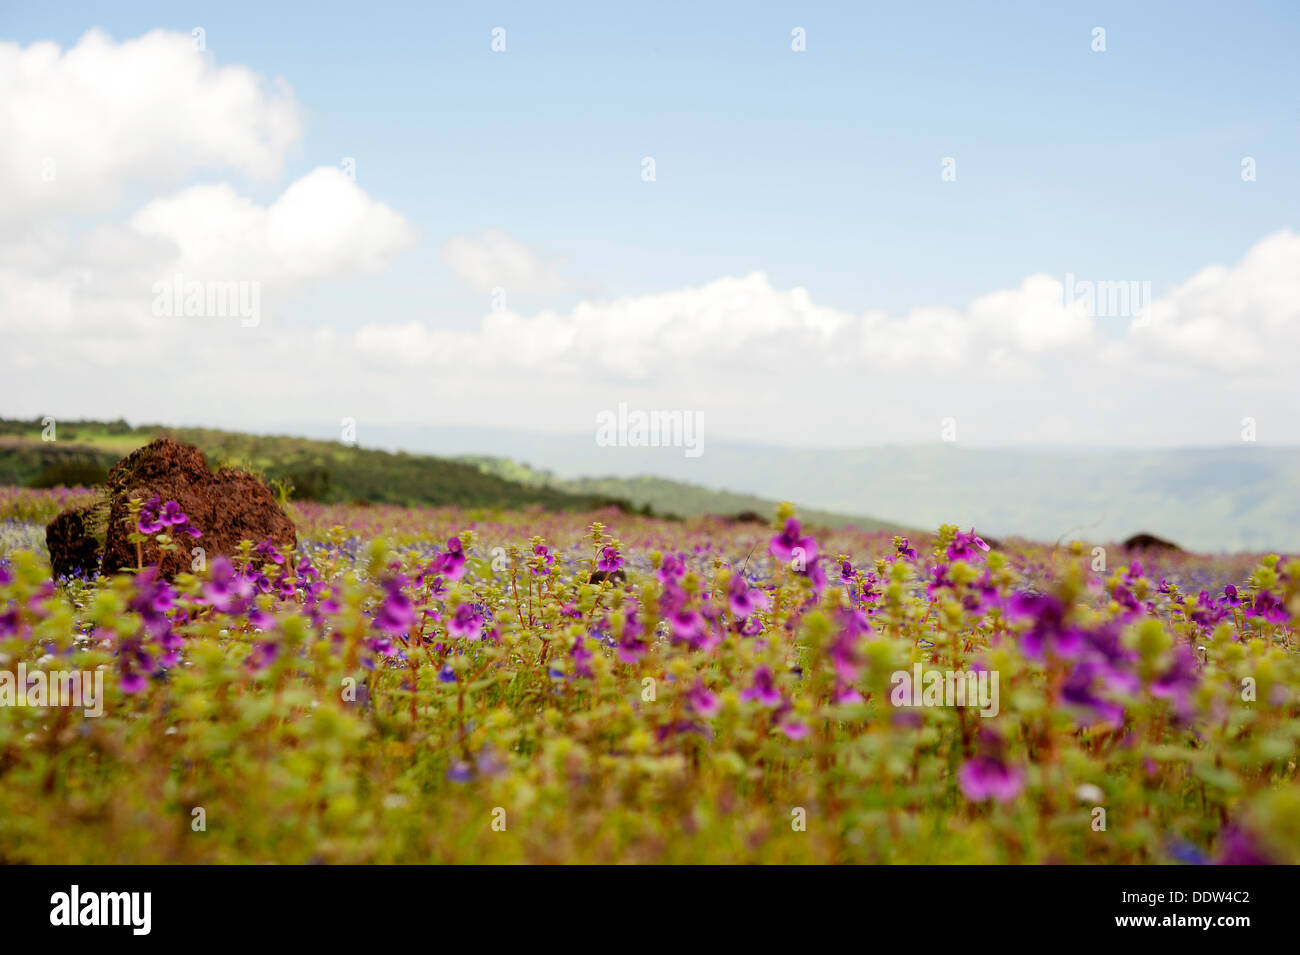 Scenic Landscape of Kass Plateau, UNESCO approved World Heritage Site Stock Photo